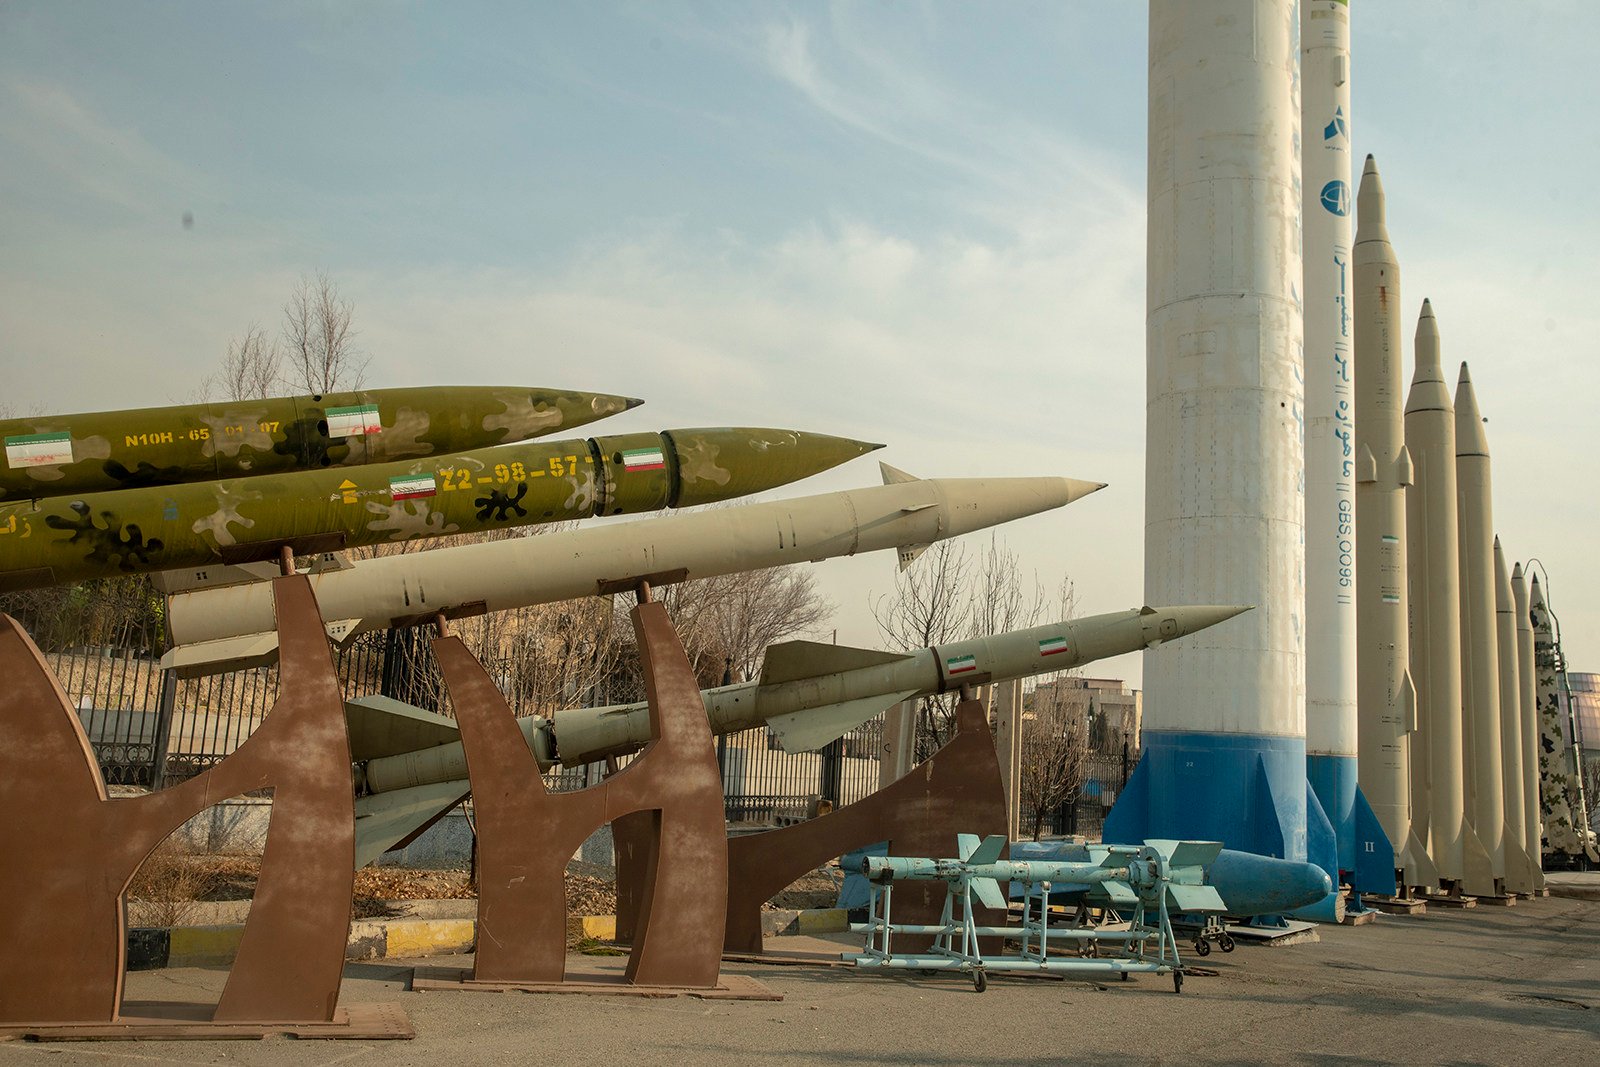 Iranian missiles are exhibited in a park in Tehran in January. Photo: Getty Images/TNS